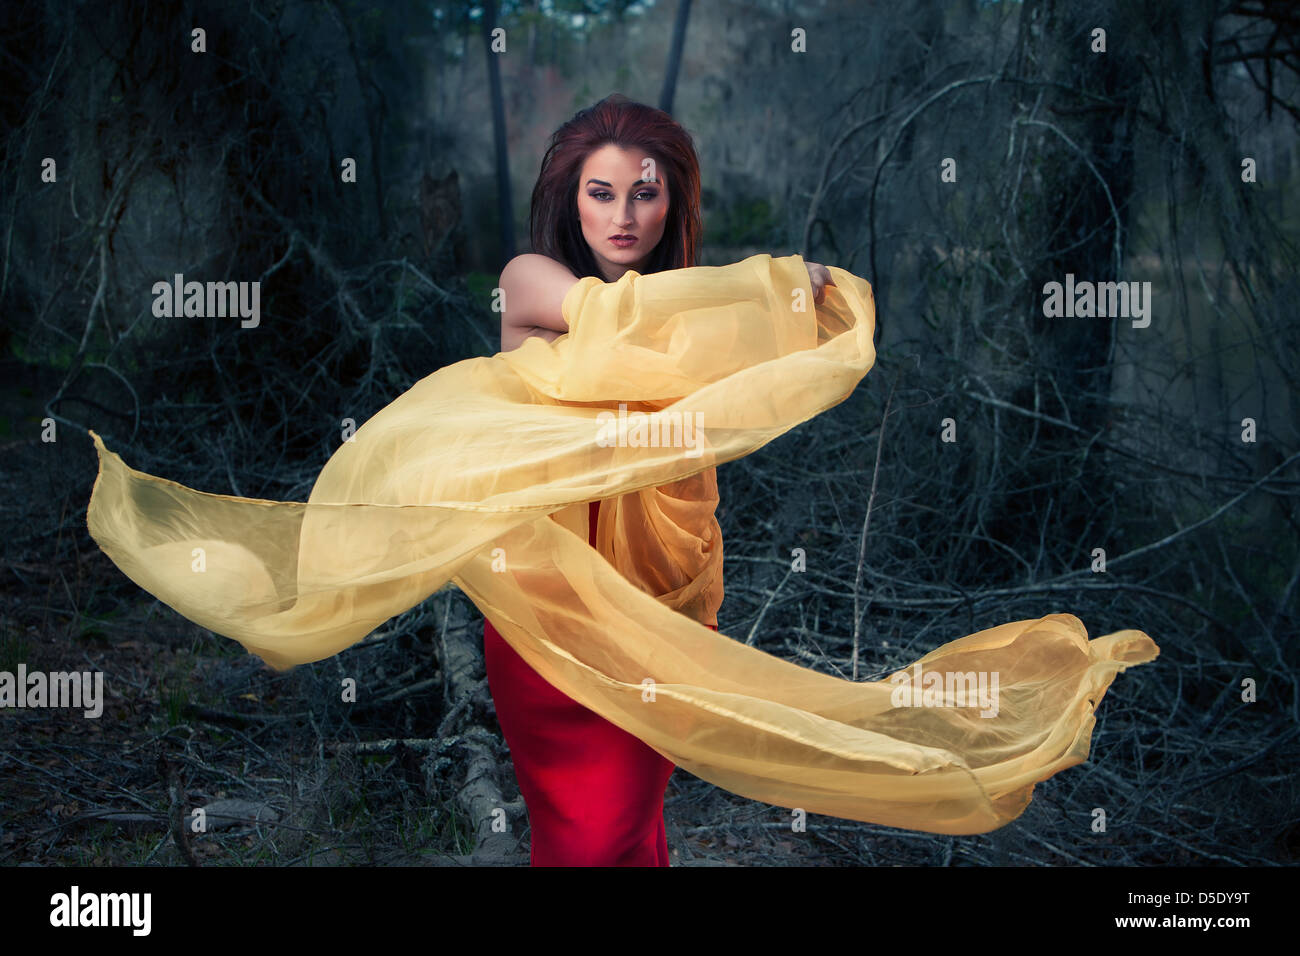 Woman swirling yellow cloth in woods Stock Photo